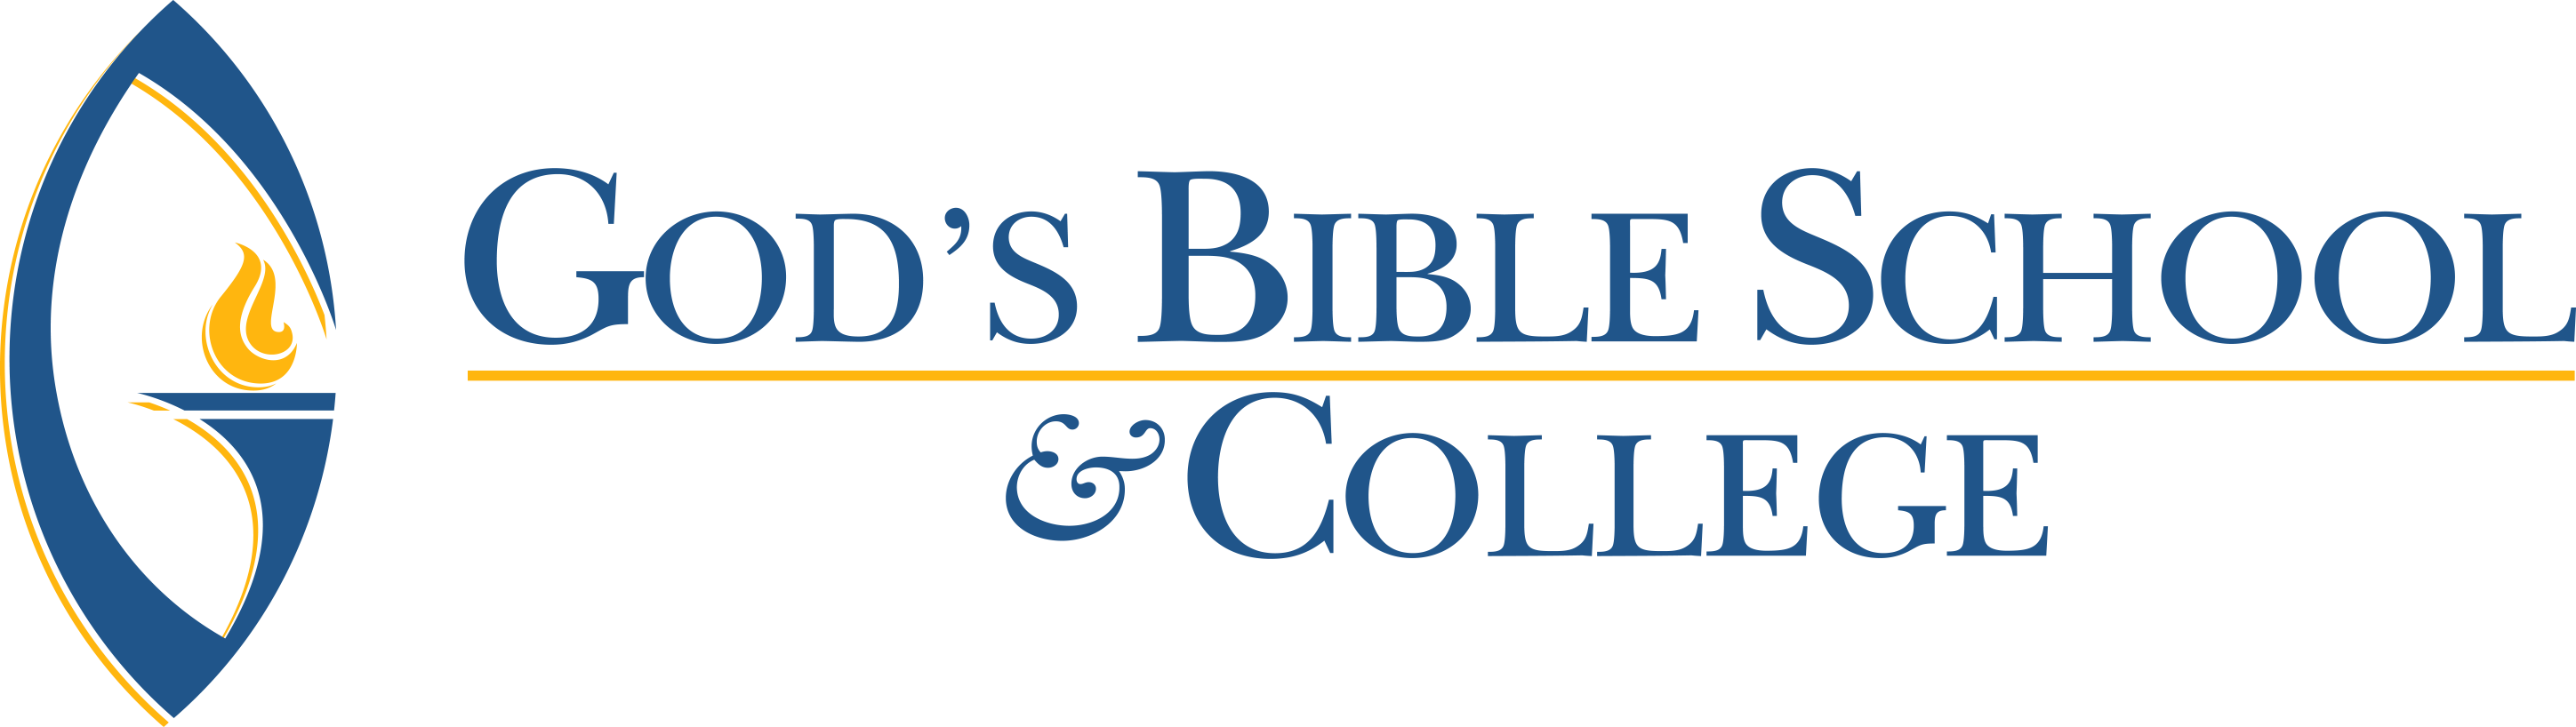 God's Bible School and College logo